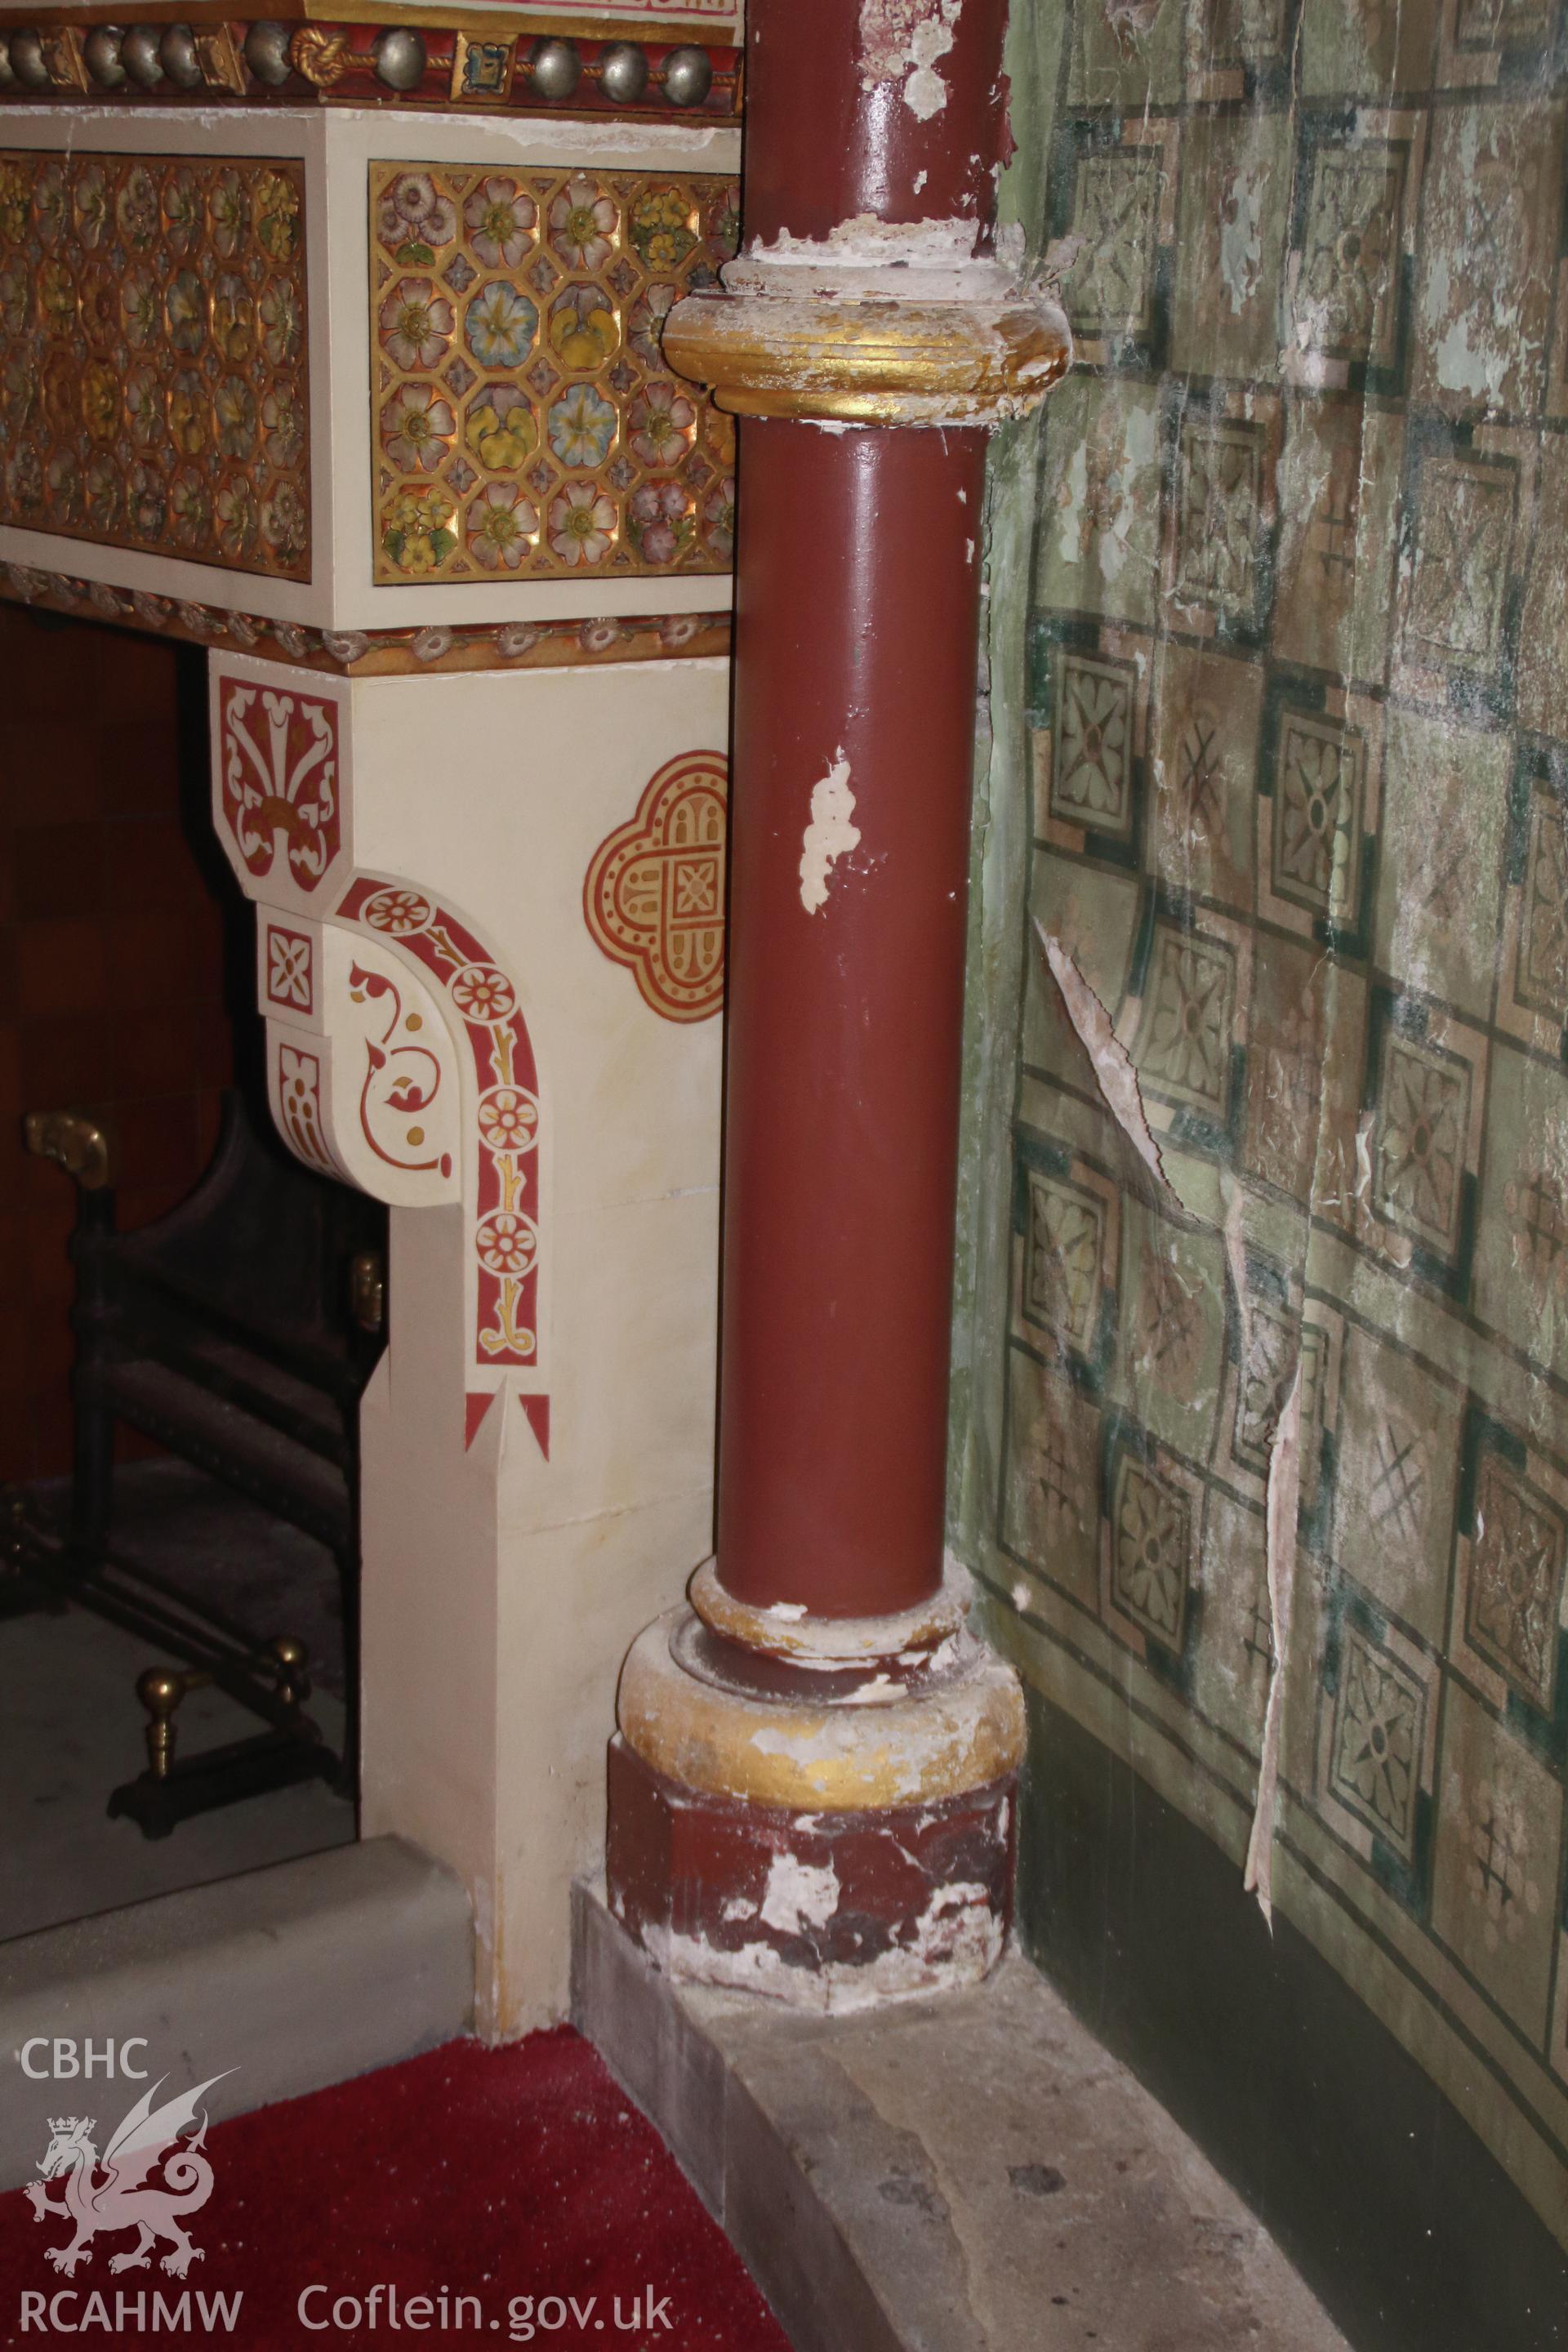 Pillar in Lady Bute's Bedroom at Castell Coch, 1st April 2019. From "Castell Coch, Tongwynlais, Cardiff. Archaeological Building Investigation & Recording & Watching Brief" by Richard Scott Jones of Heritage Recording Services Wales. Report No 202.